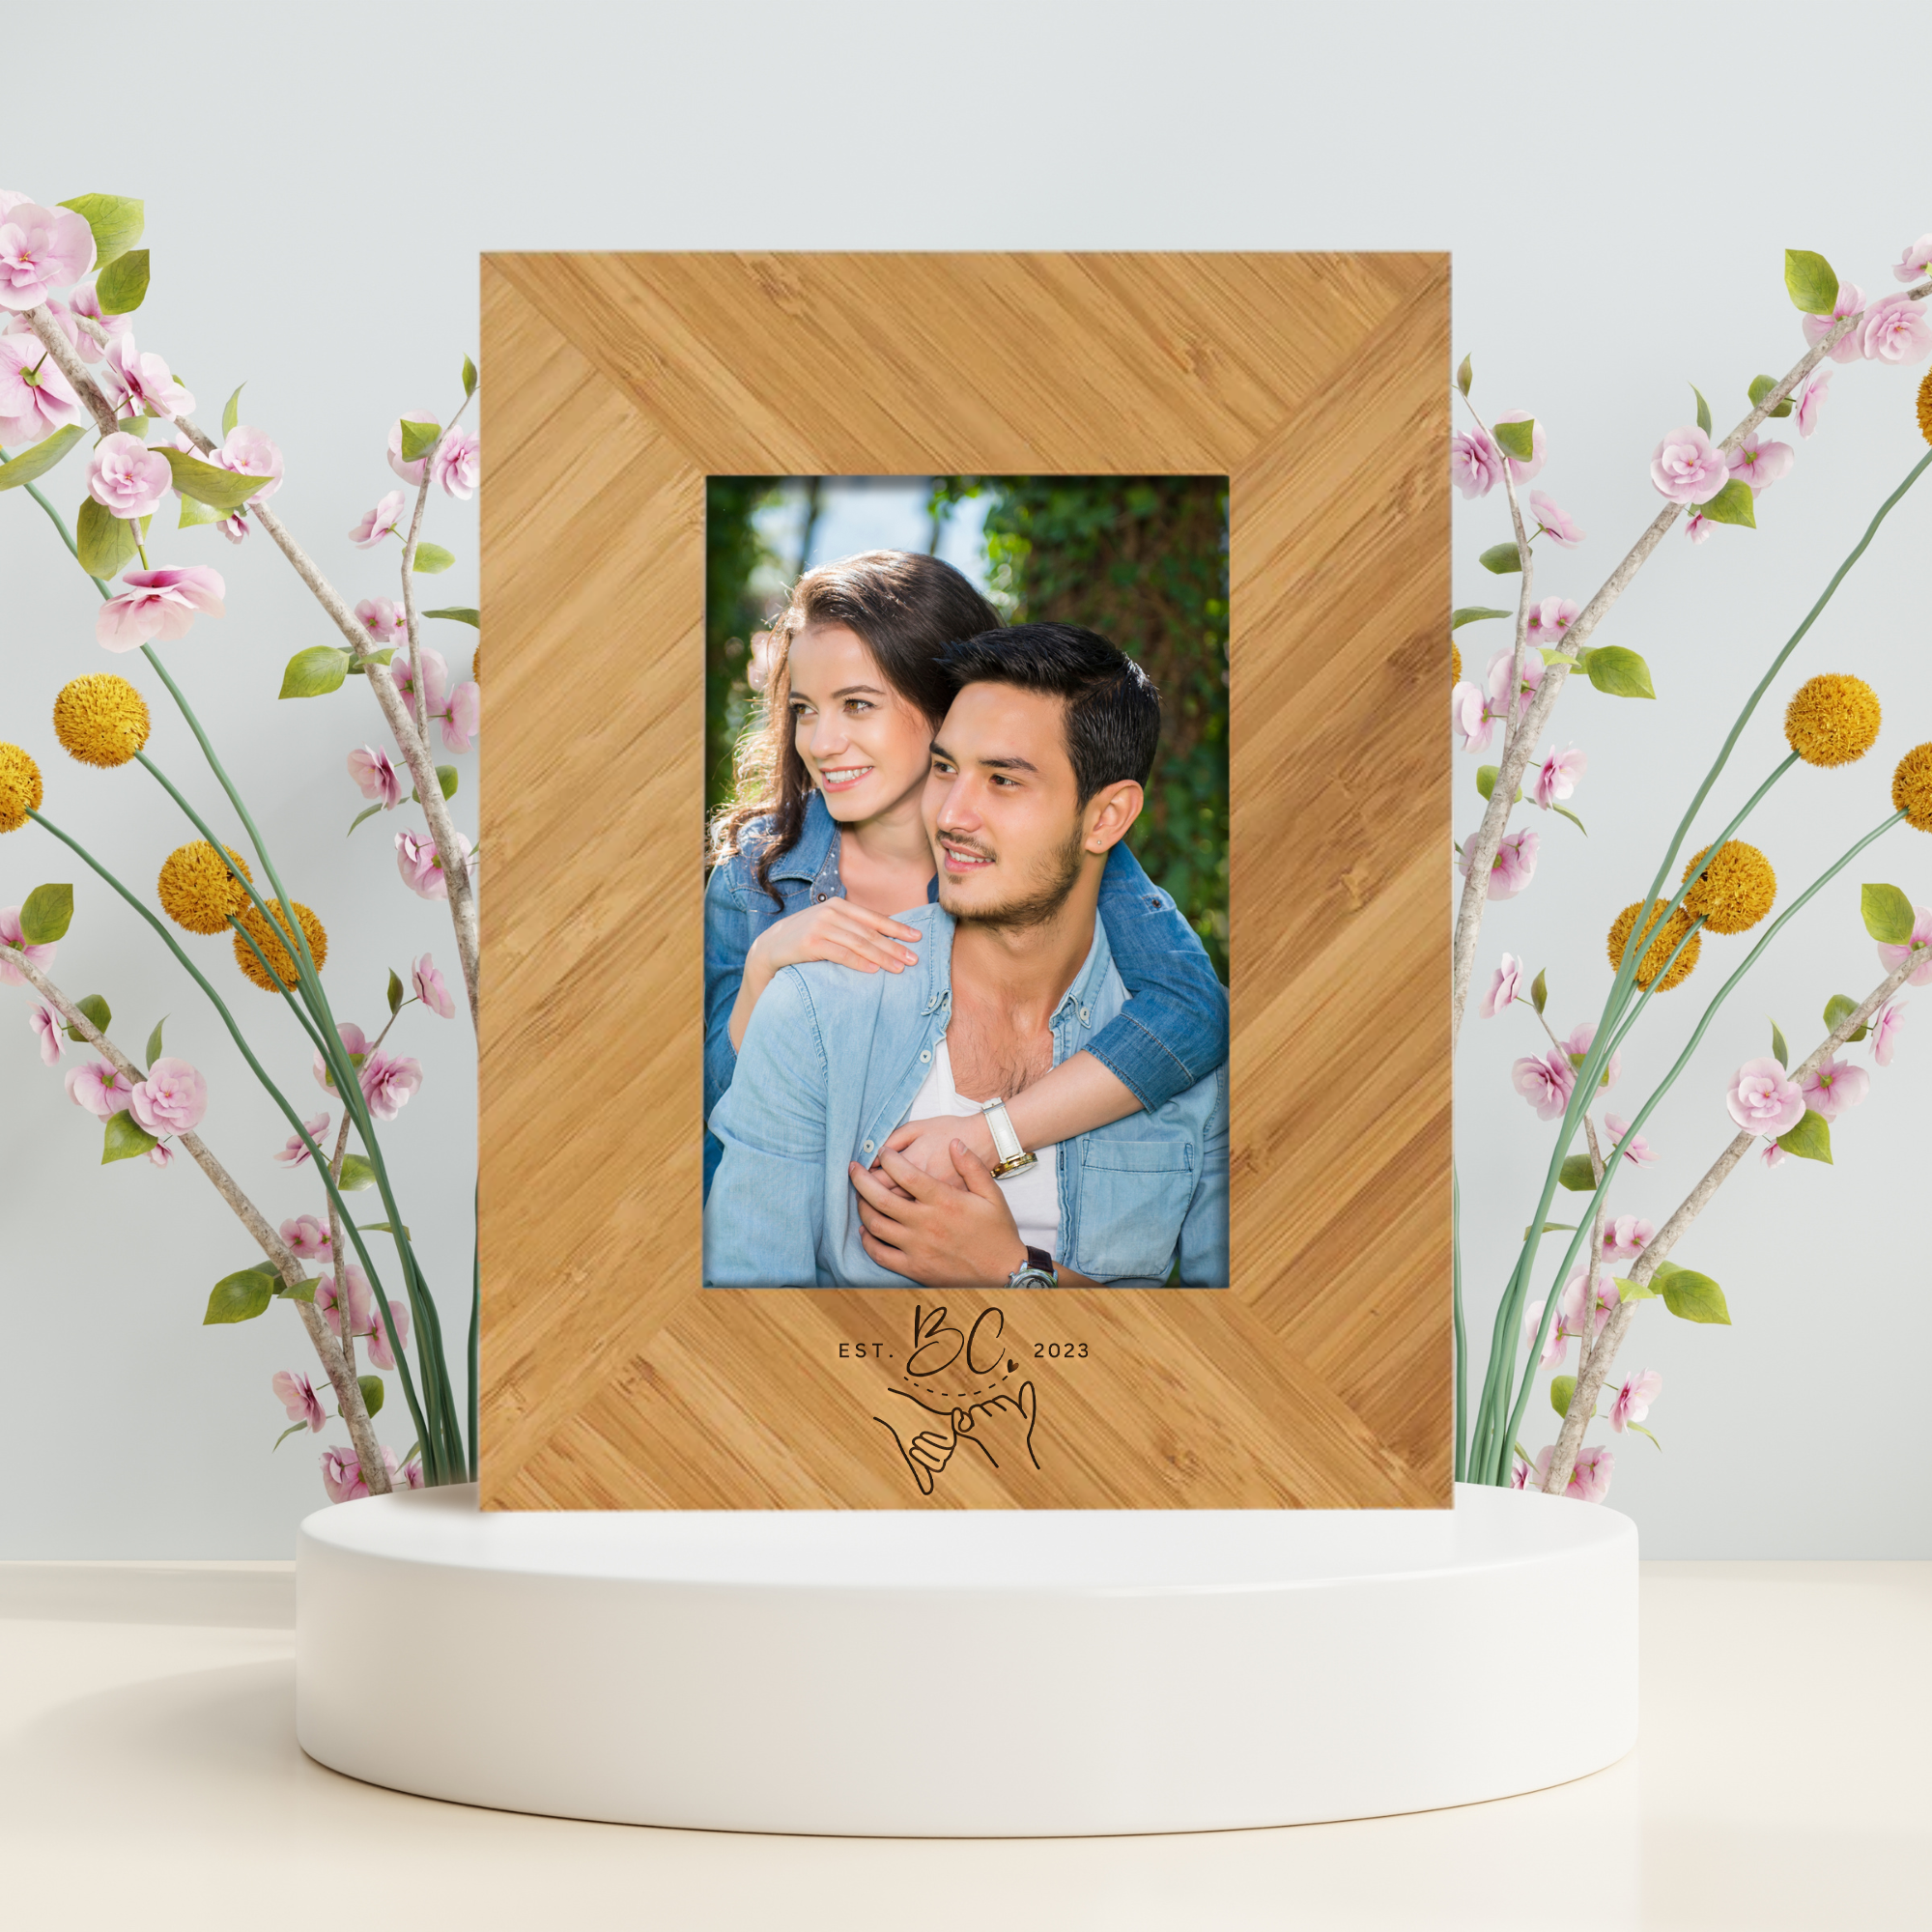 Valentine's Day Gift - BAMBOO PICTURE FRAME